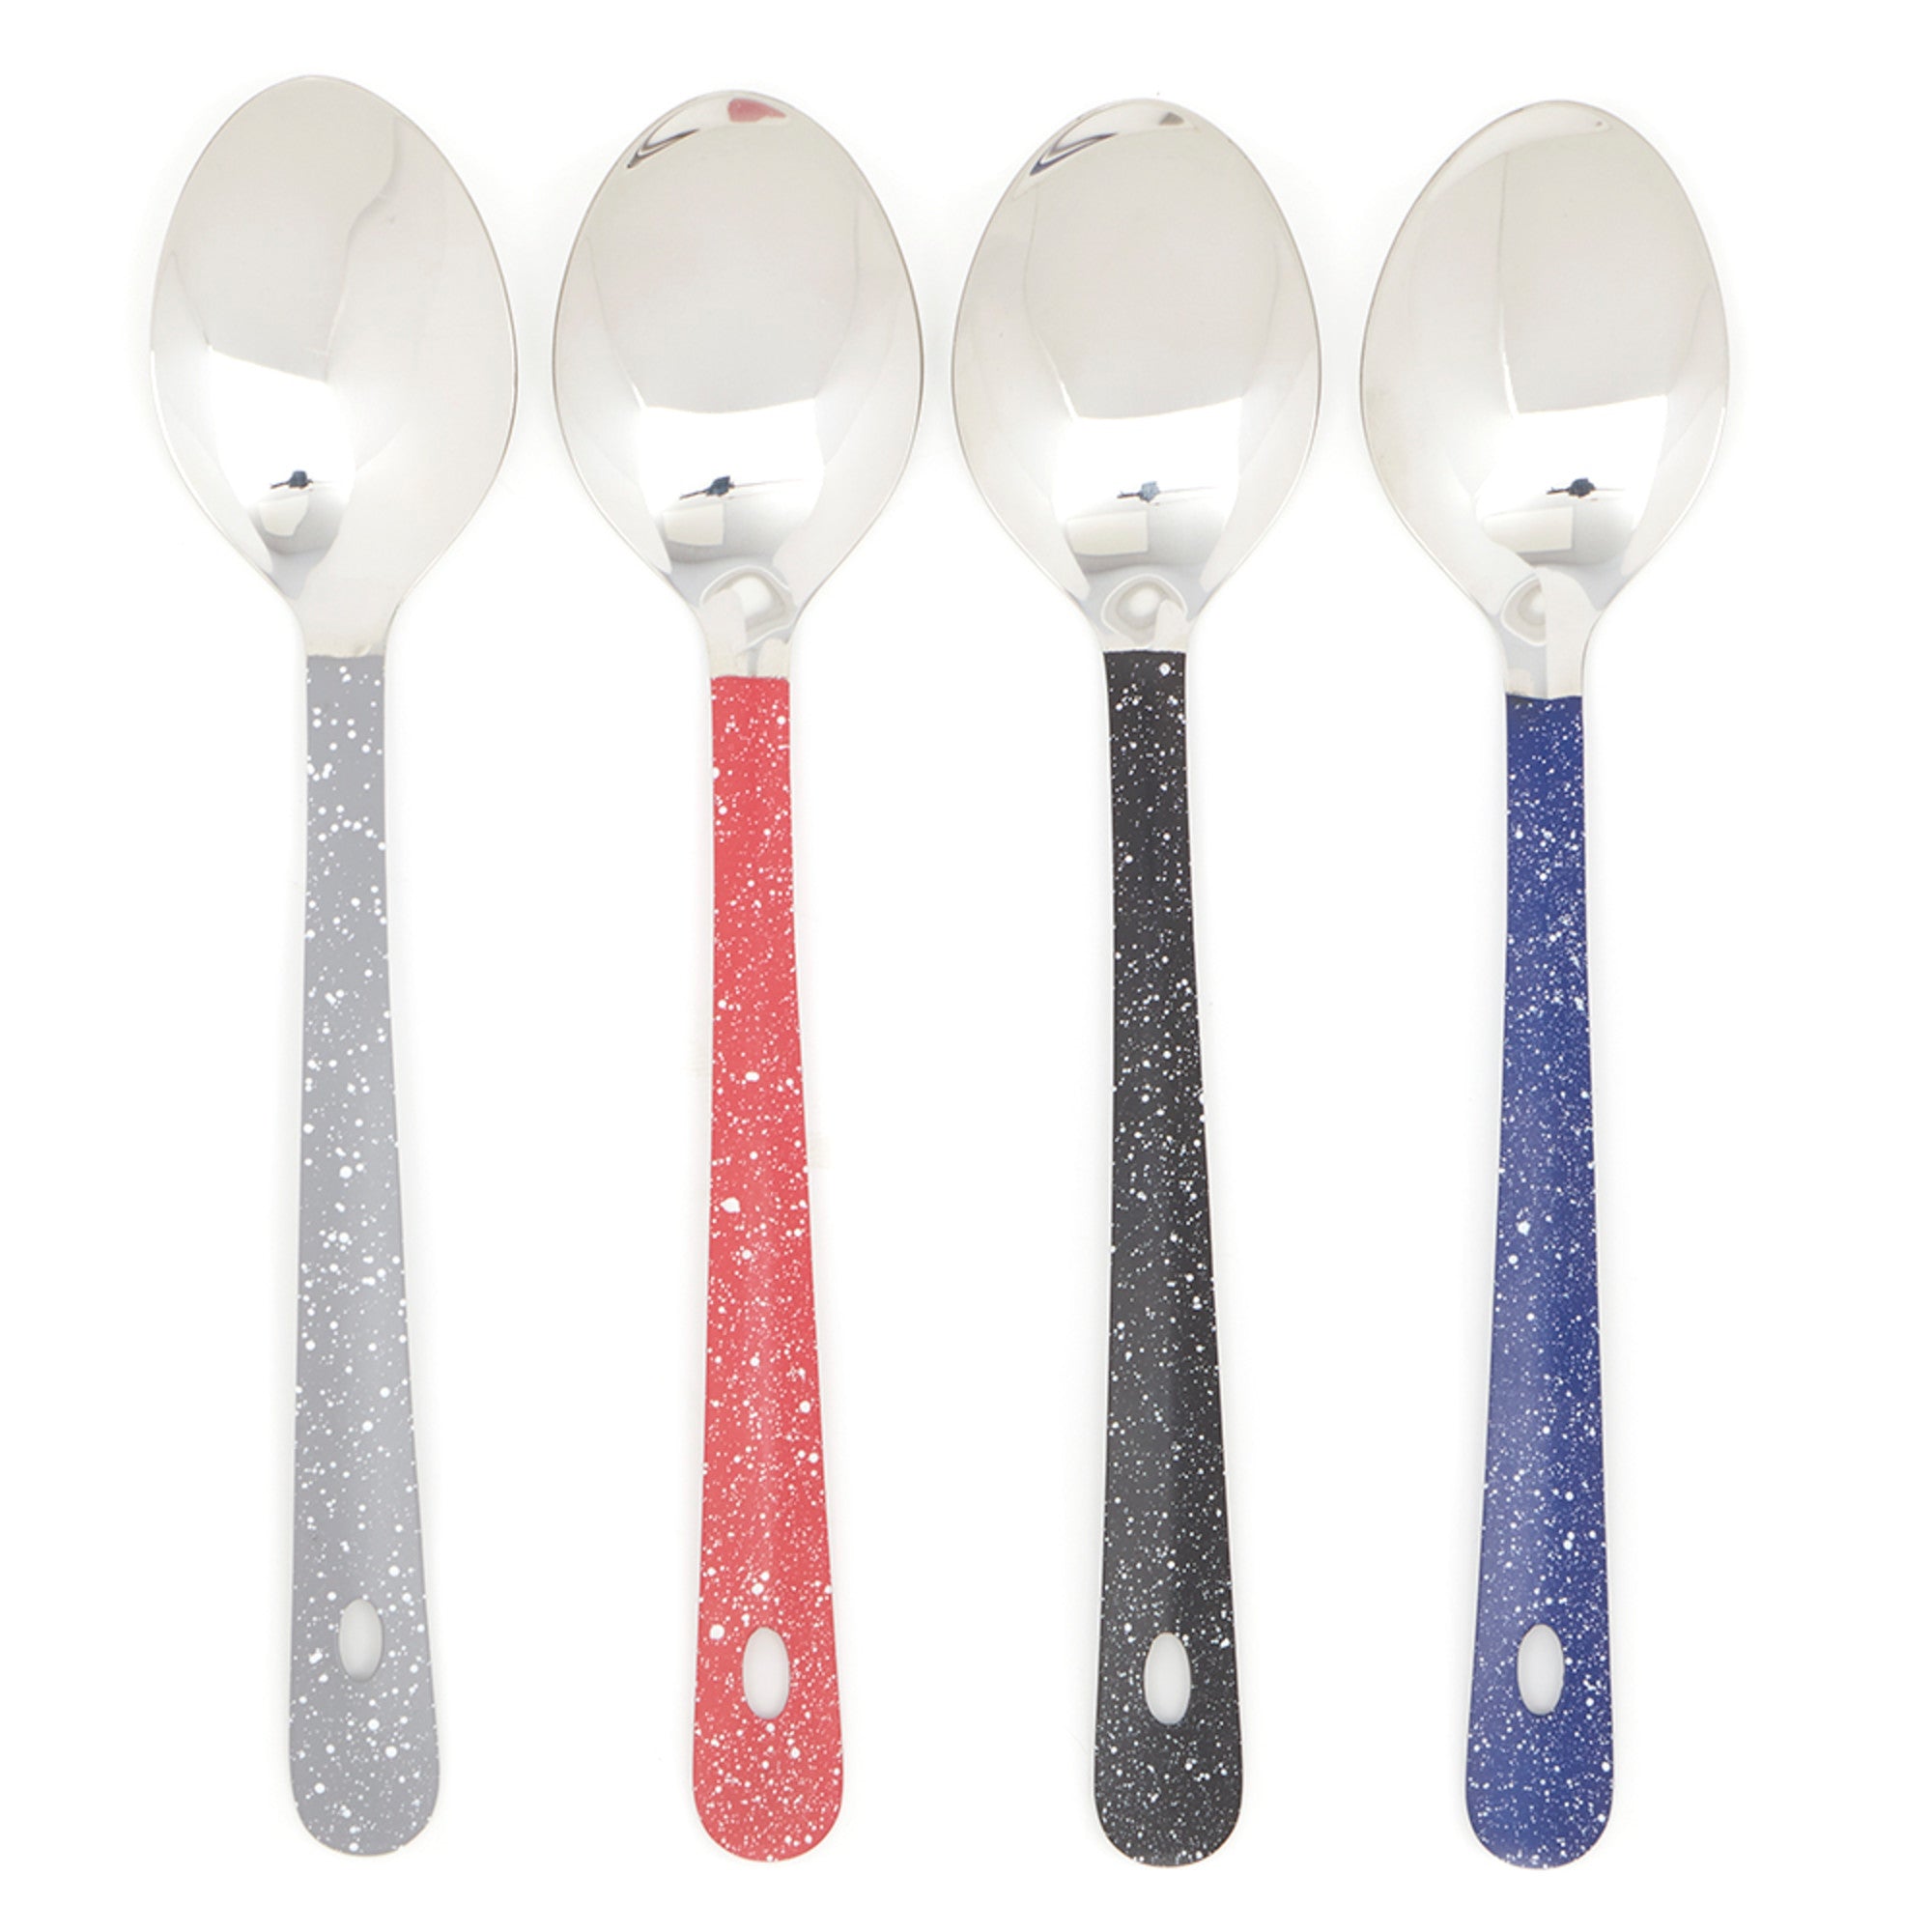 Home Basics Speckled Stainless Steel Serving Spoon - Assorted Colors